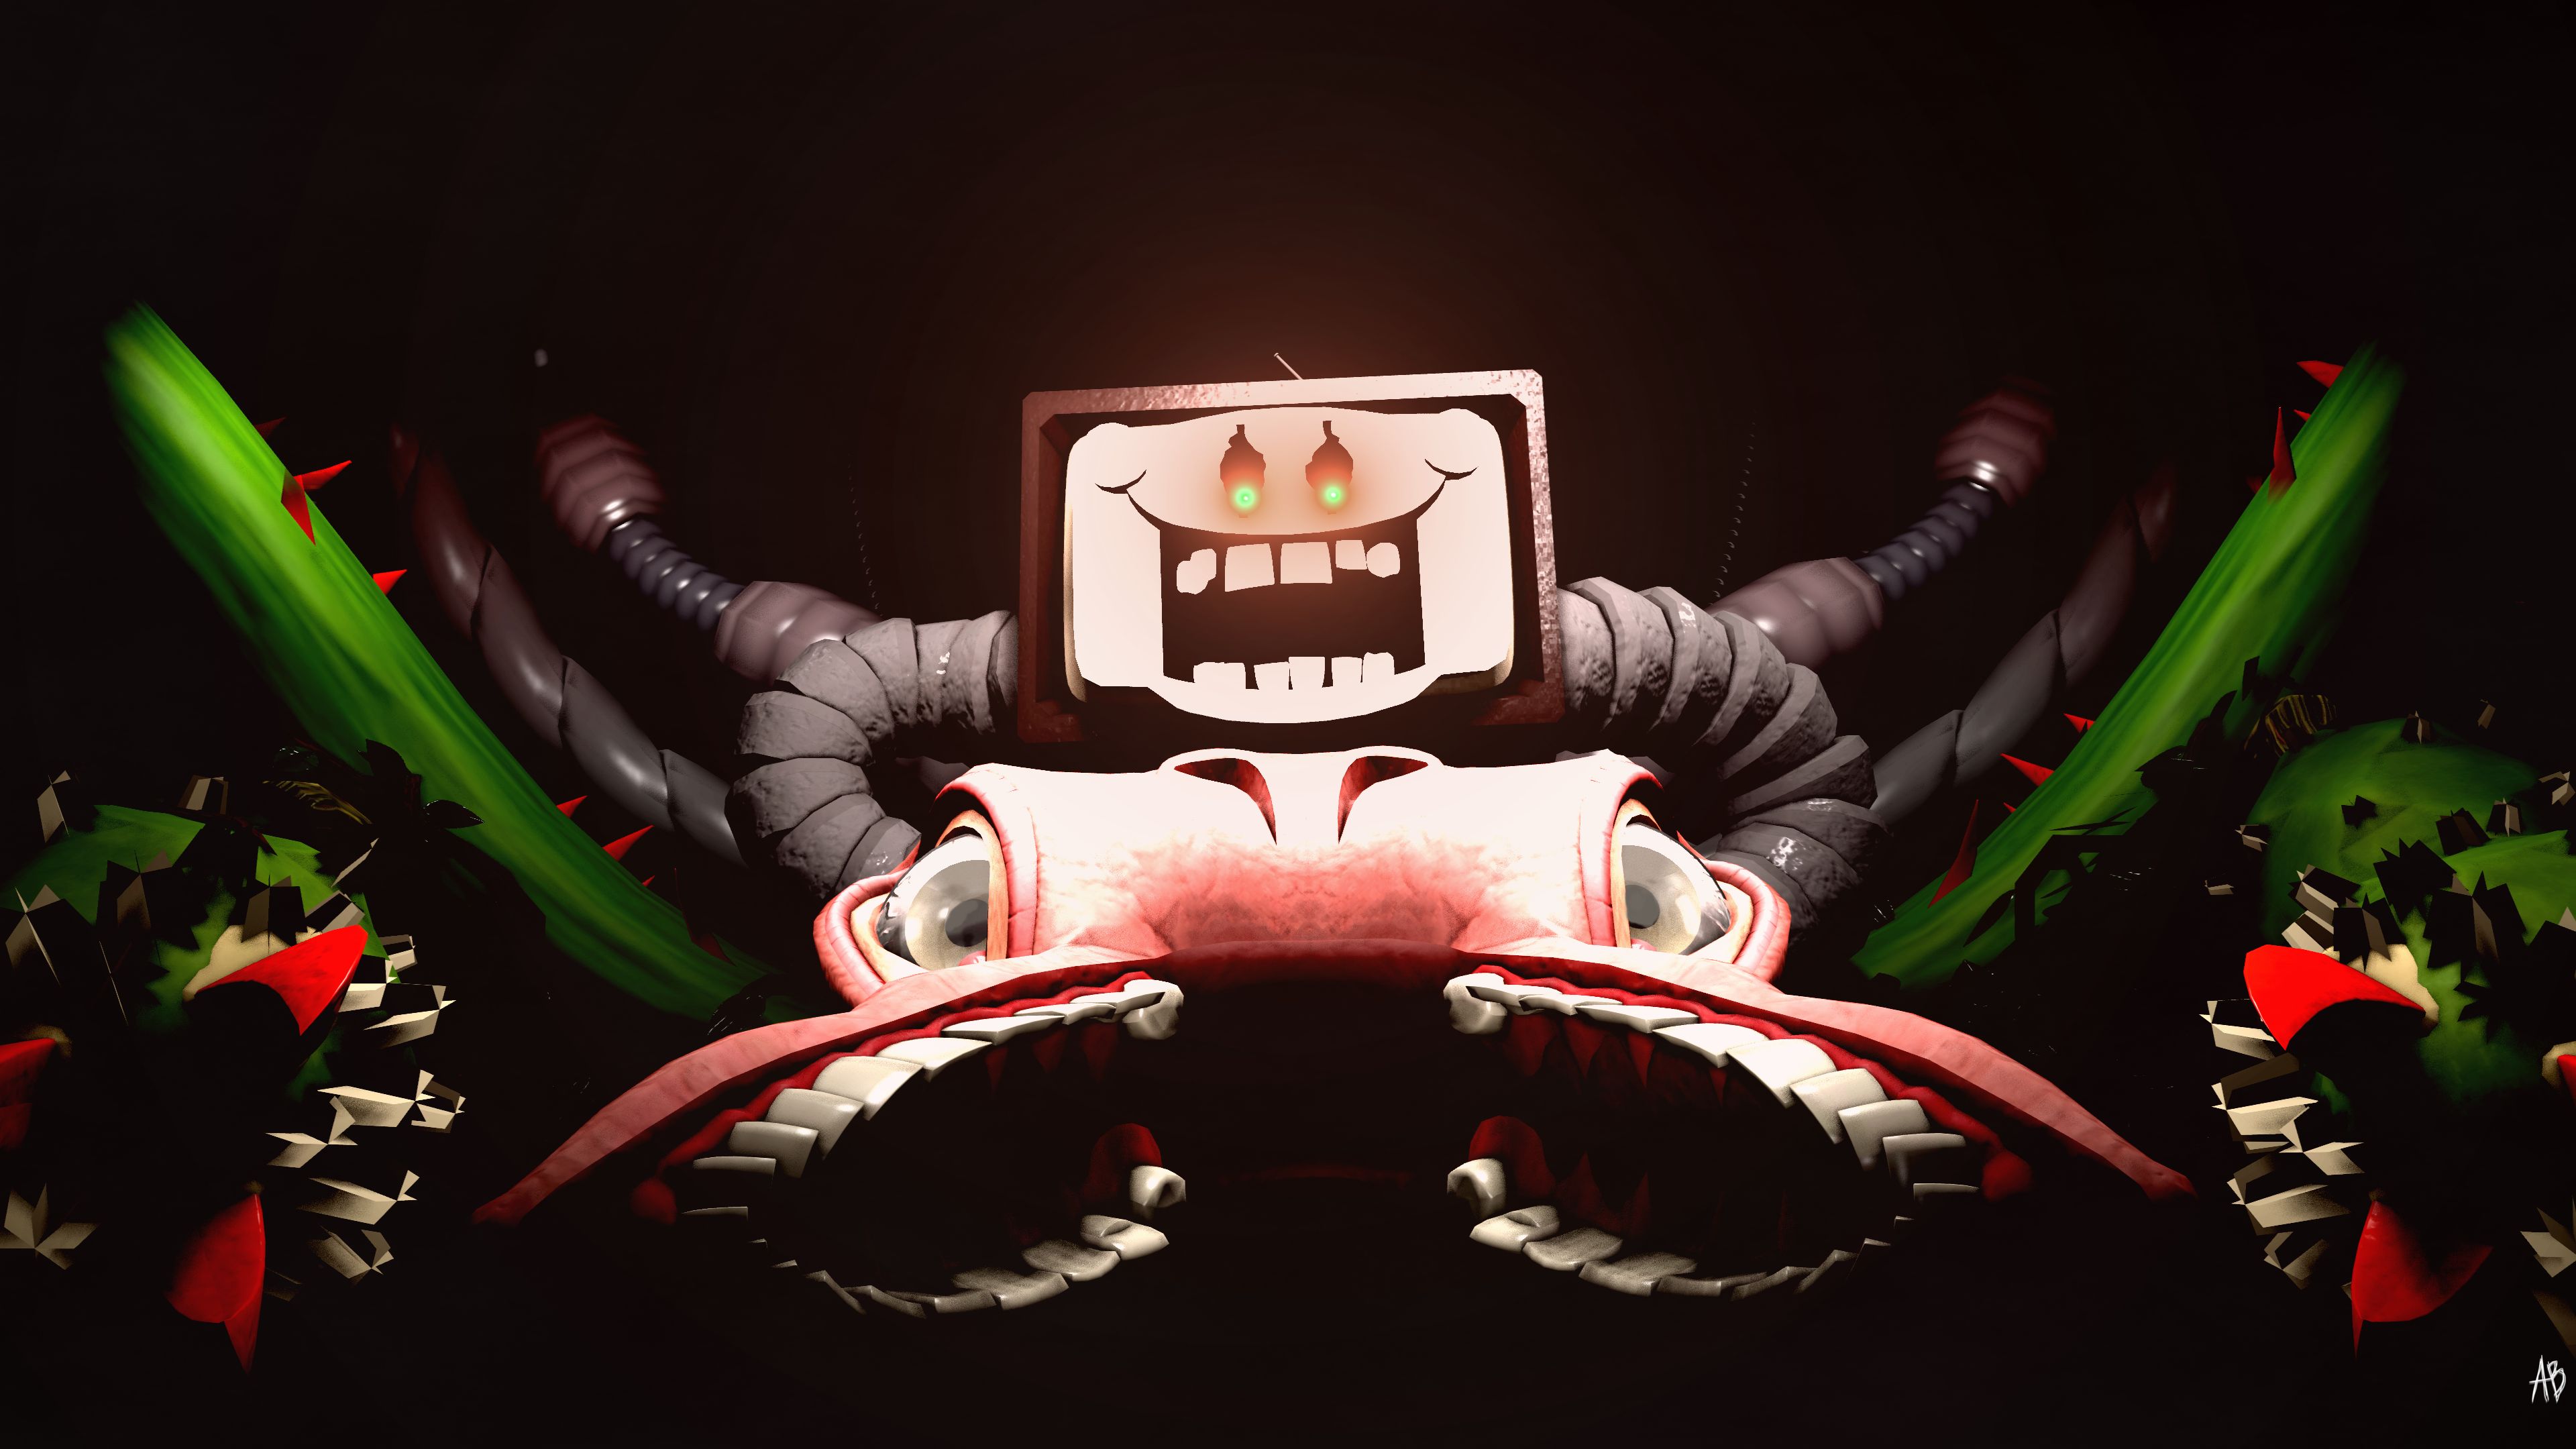 omega flowey APK (Android Game) - Free Download